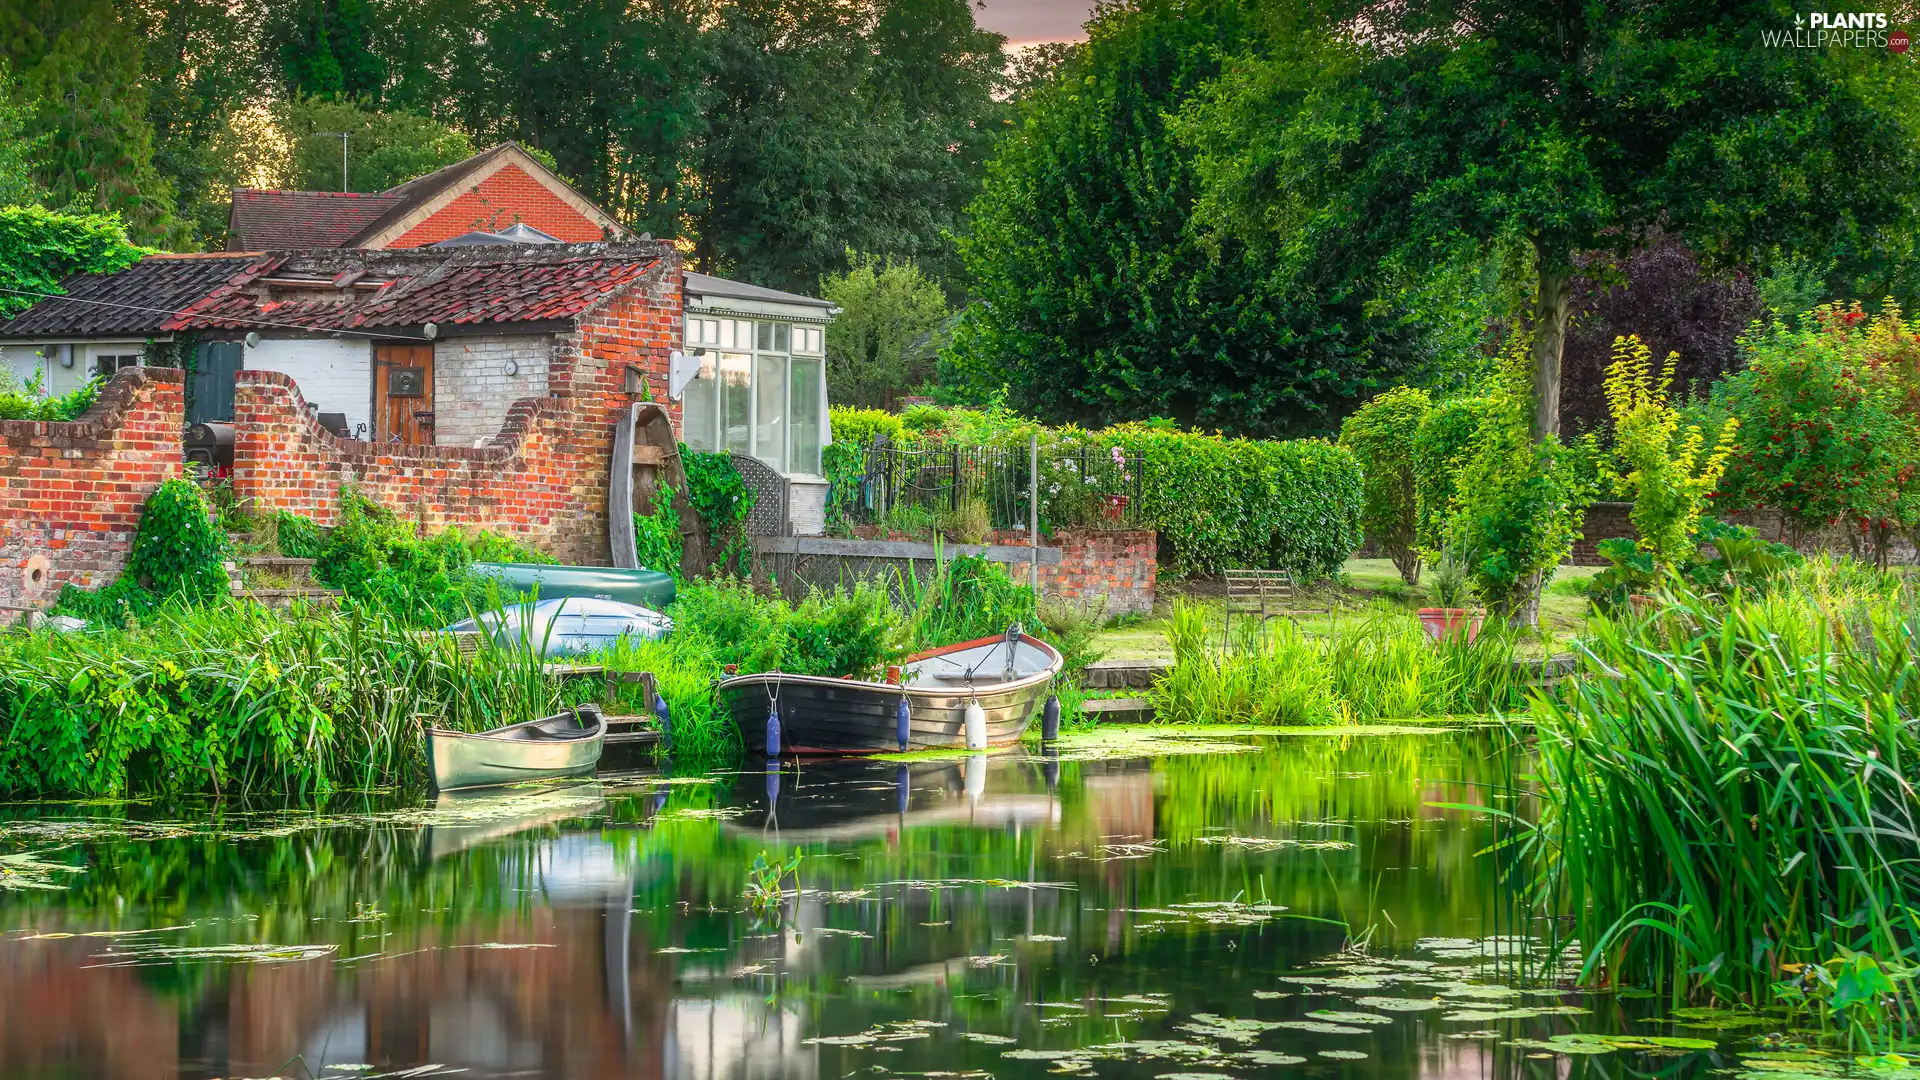 Pond - car, buildings, viewes, boats, Houses, trees, grass